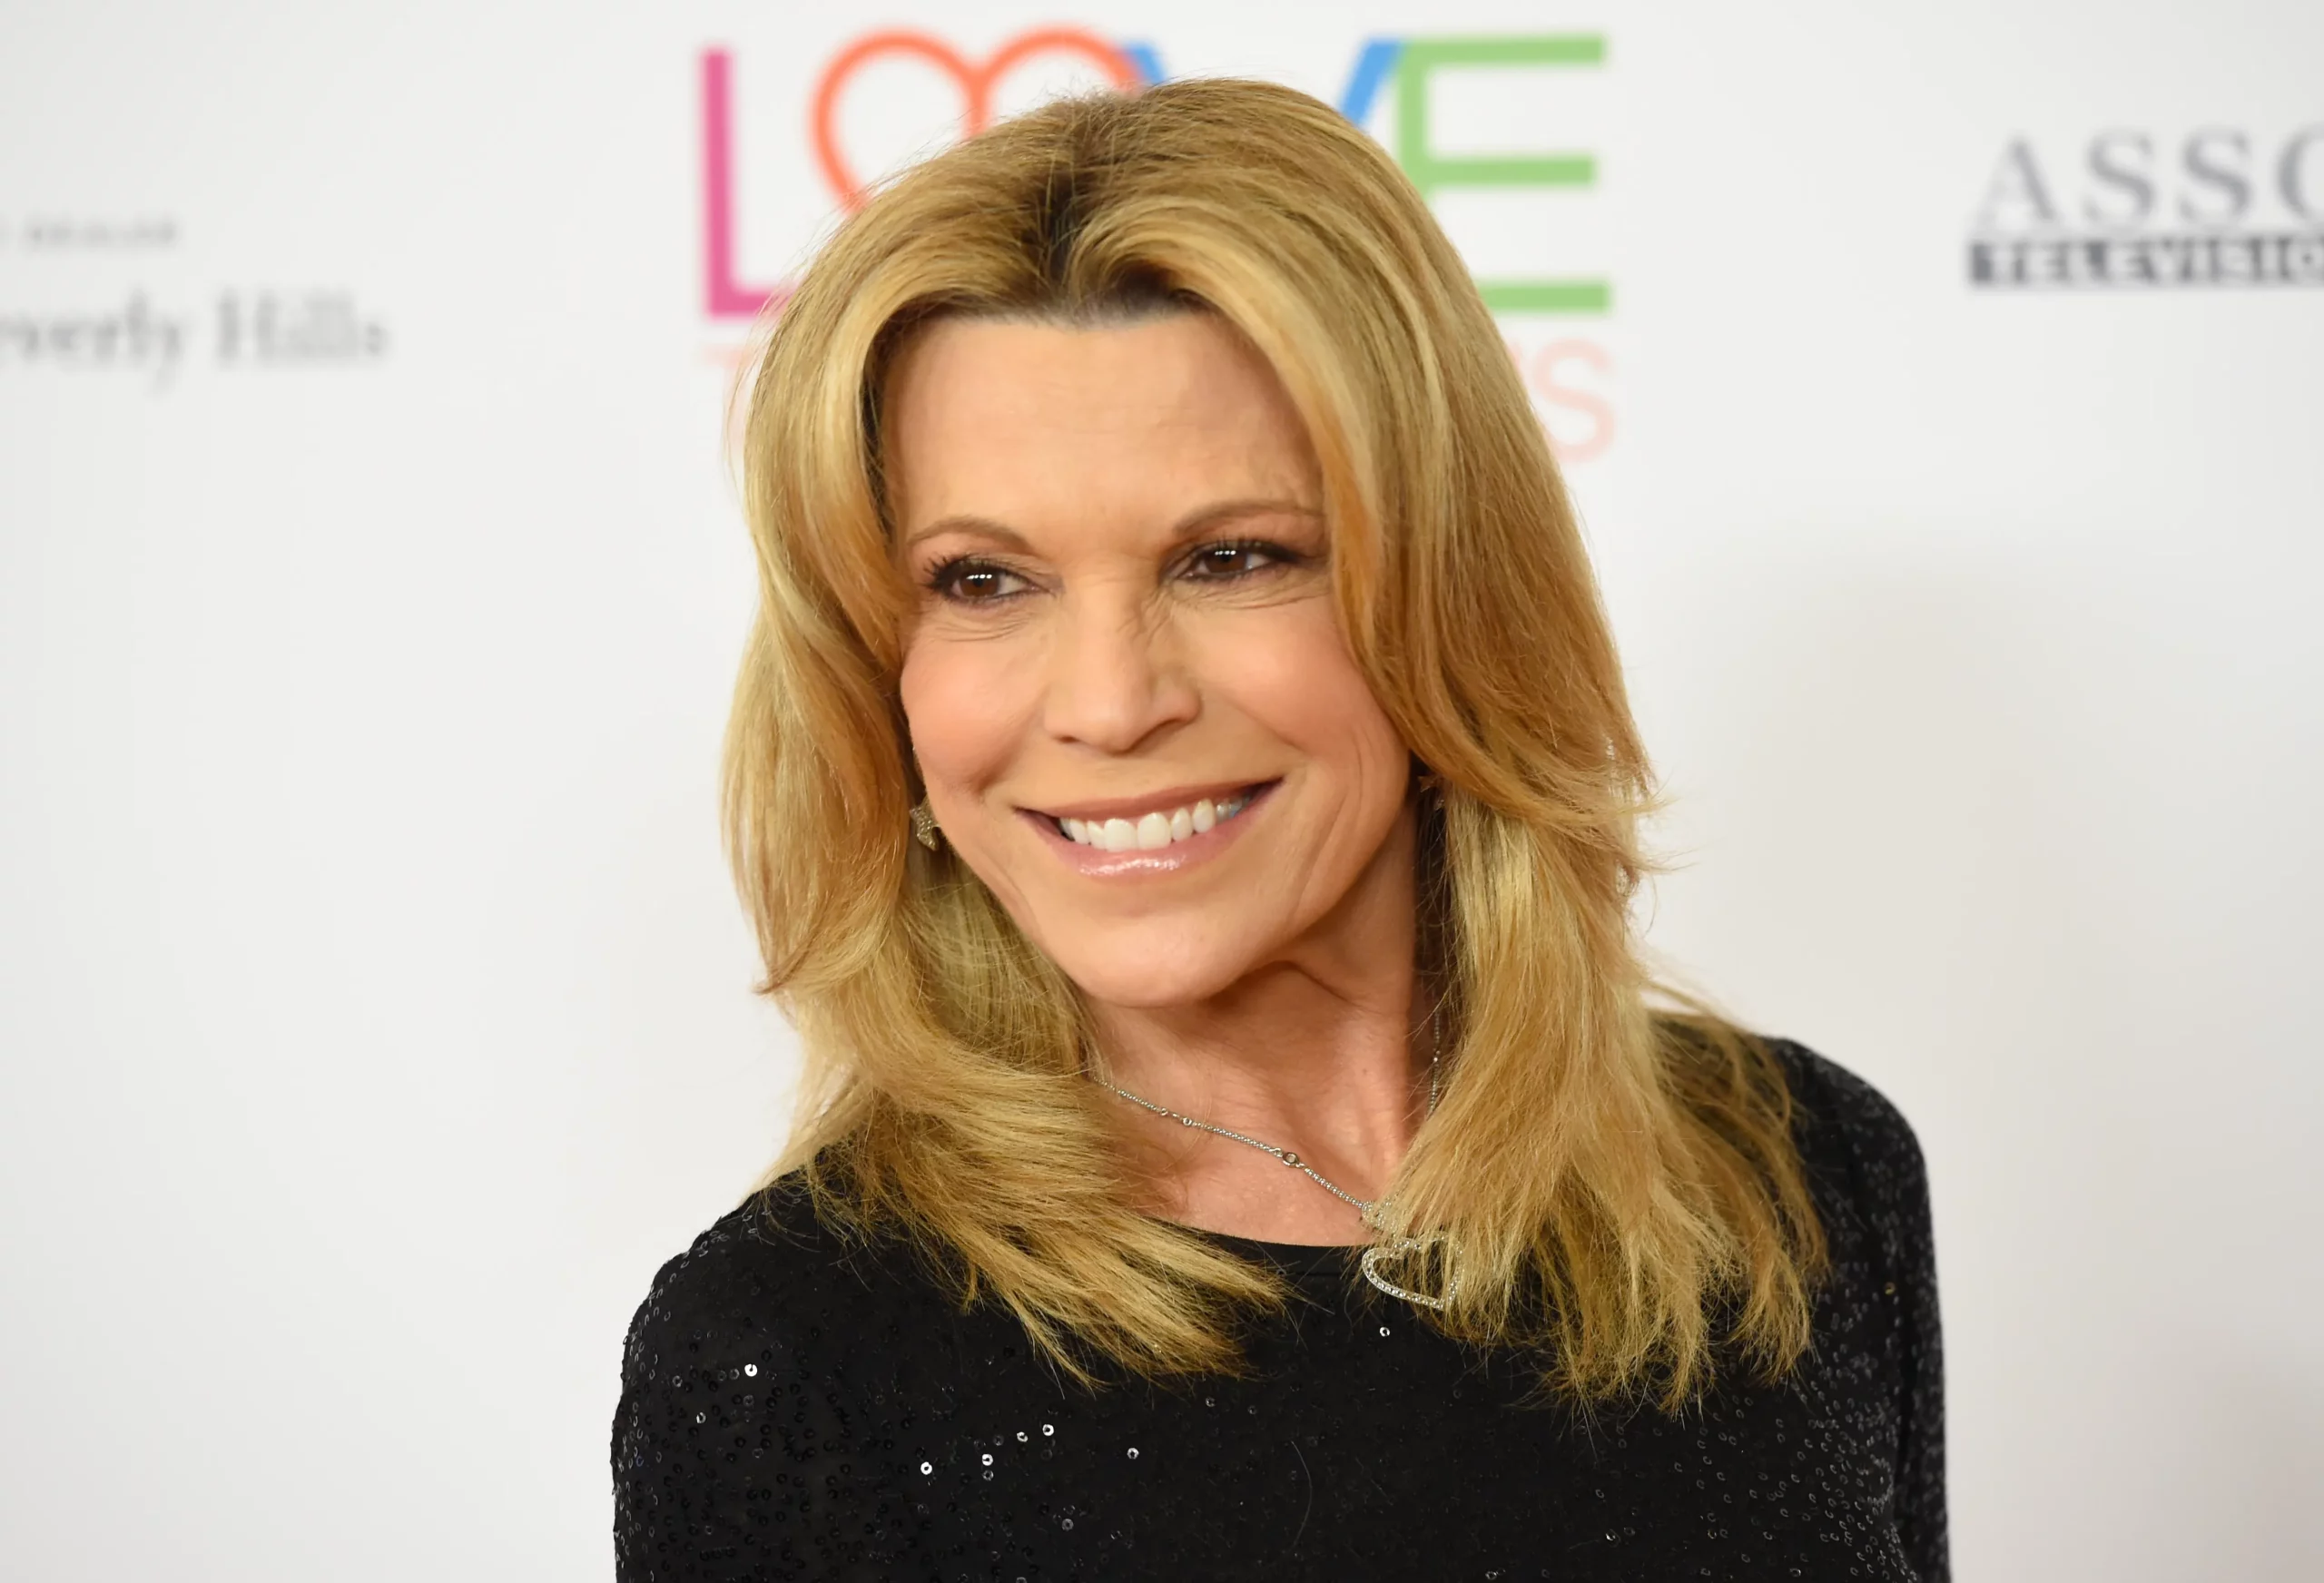 how old is vanna white